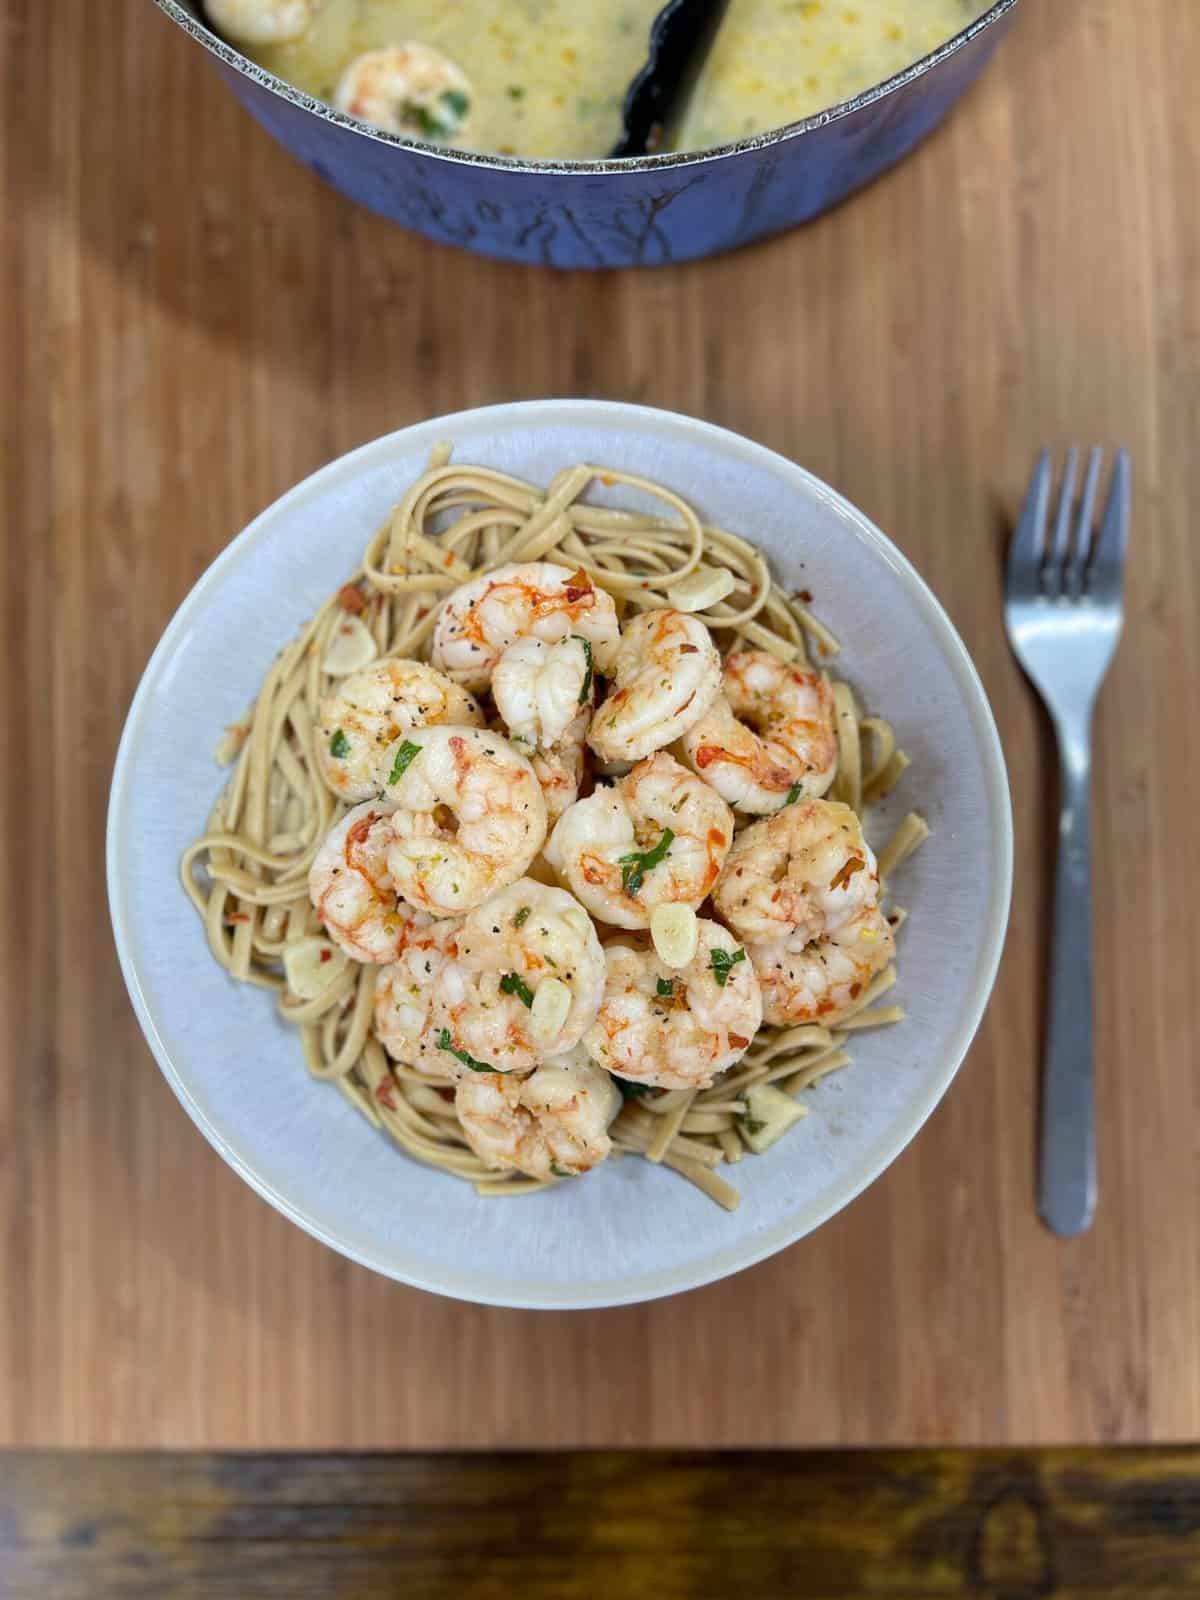 Bowl of Shrimp Scampi with Herbs